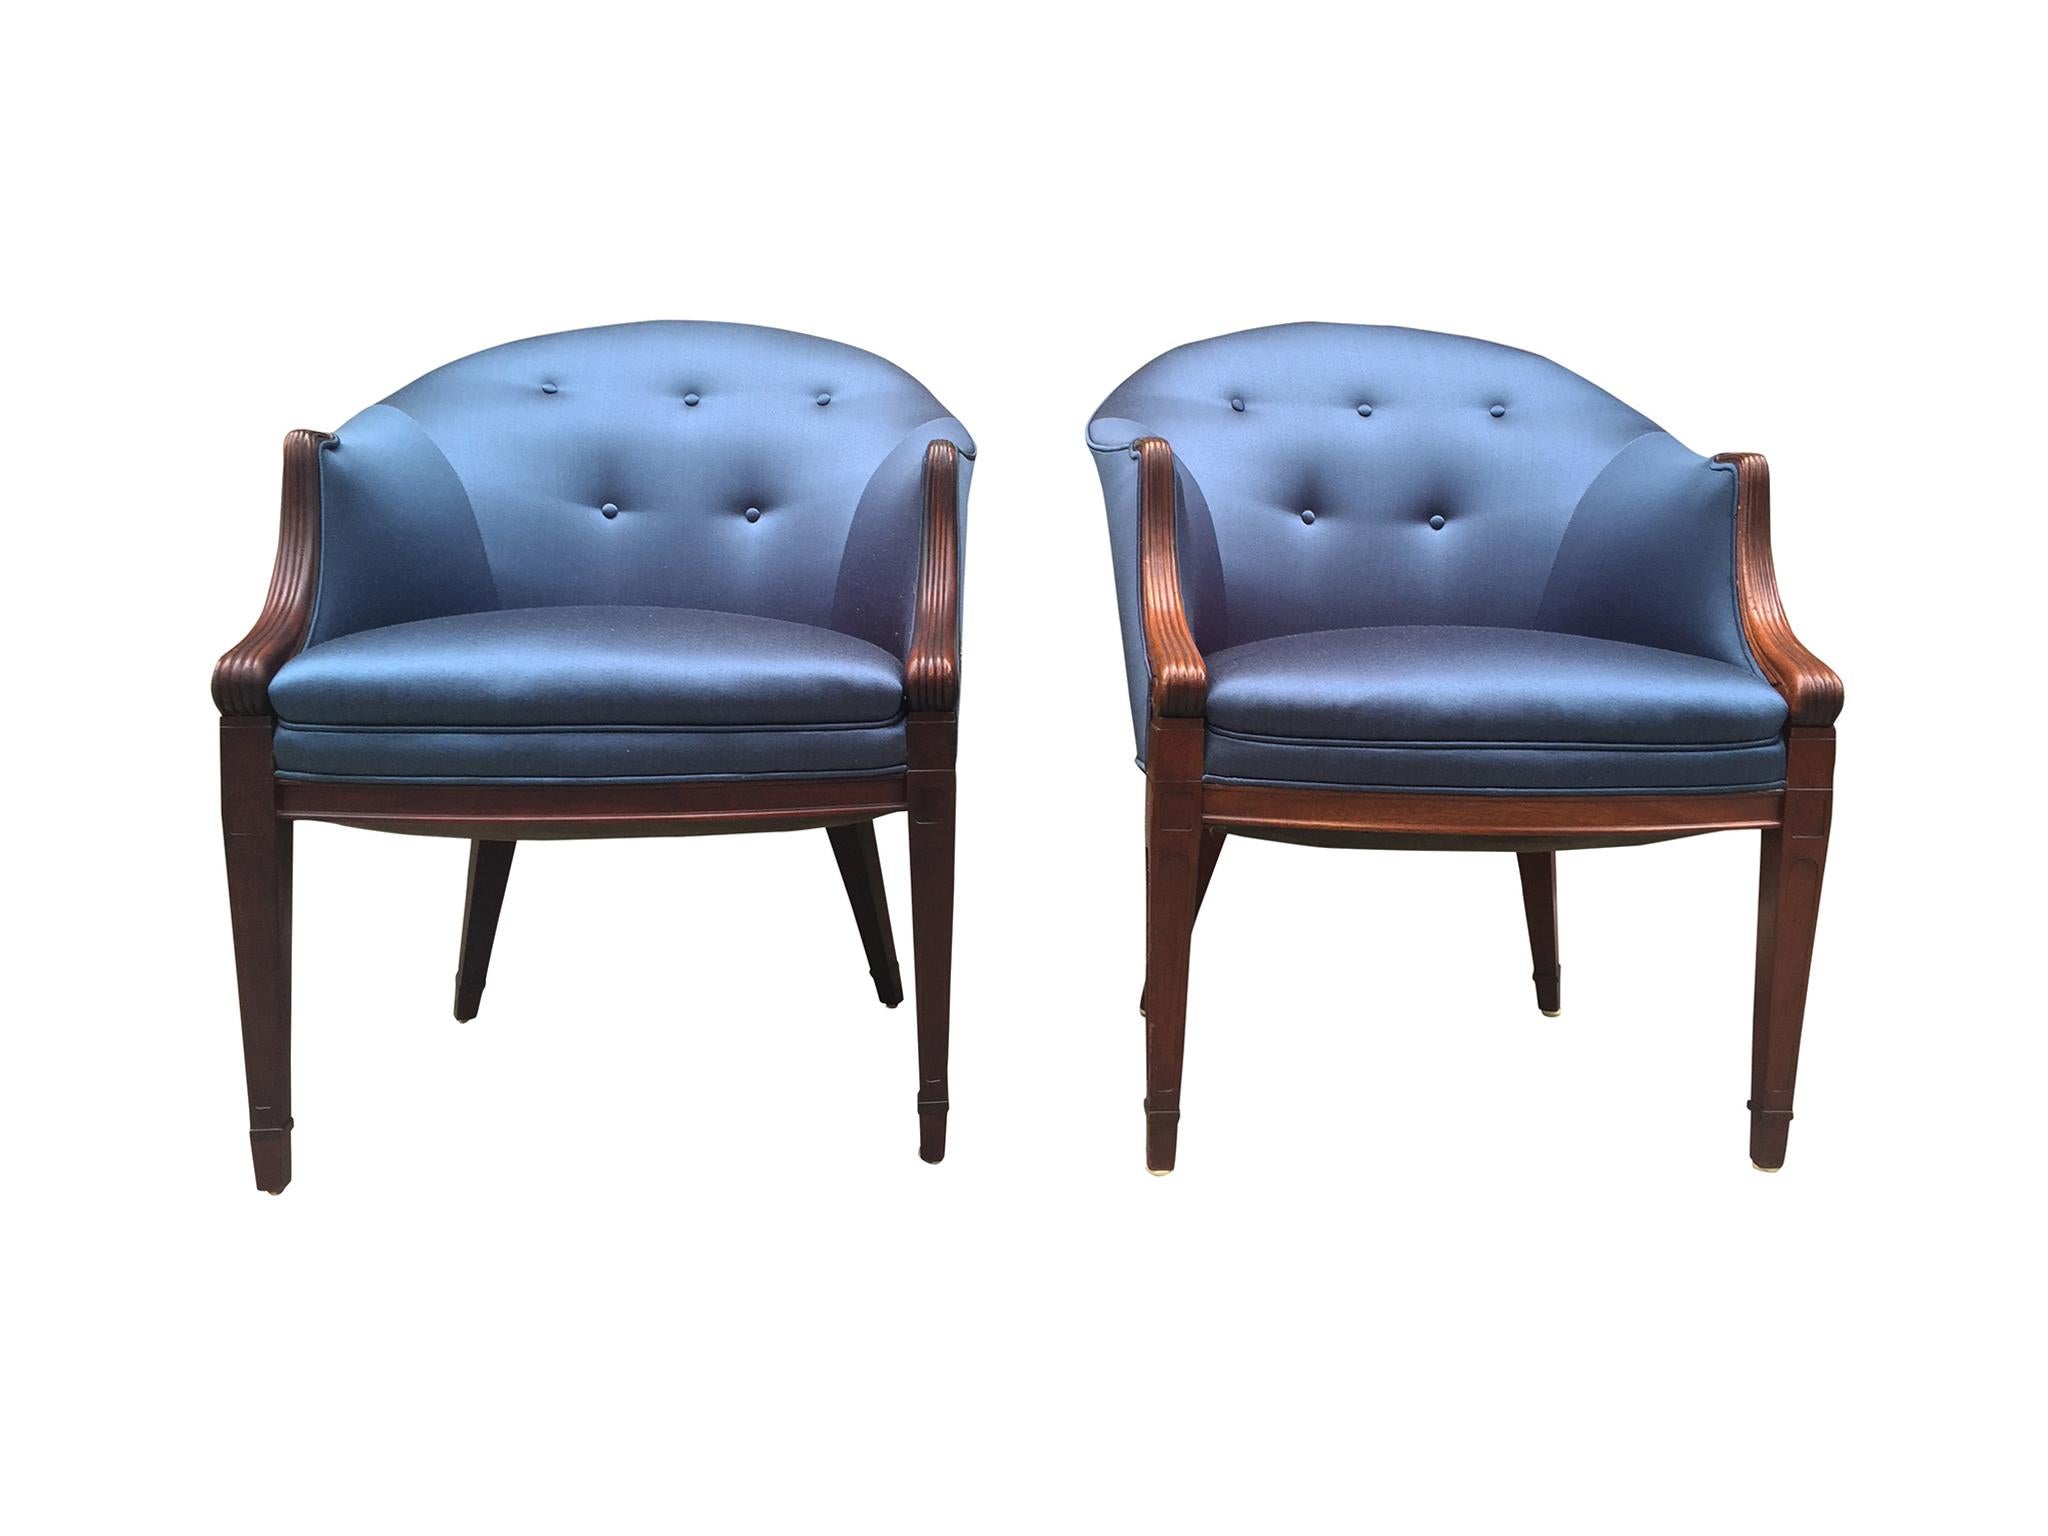 An elegant pair of easy chairs designed by Frits Henningsen, Denmark, 1940s. The chairs are comprised of mahogany. They are button-tufted and newly reupholstered in a fine, sapphire-blue silk. Henningsen's design brings together the smooth lines of